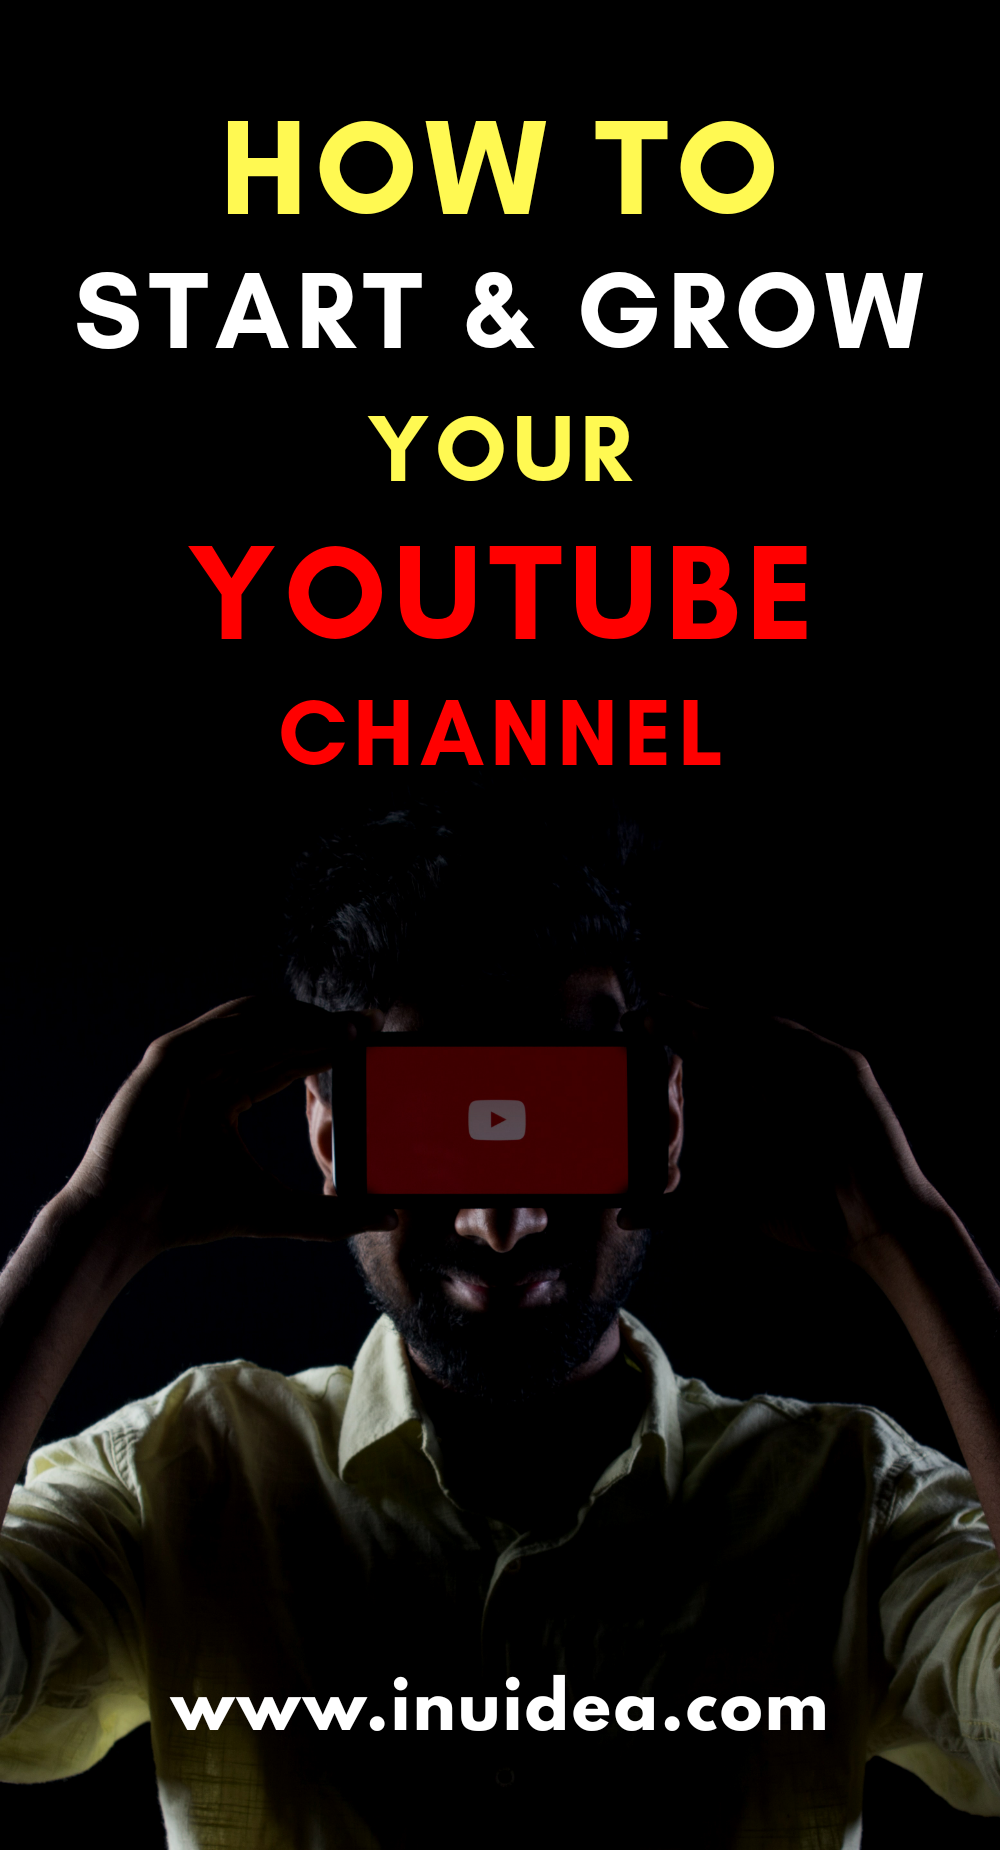 Grow your YouTube channel